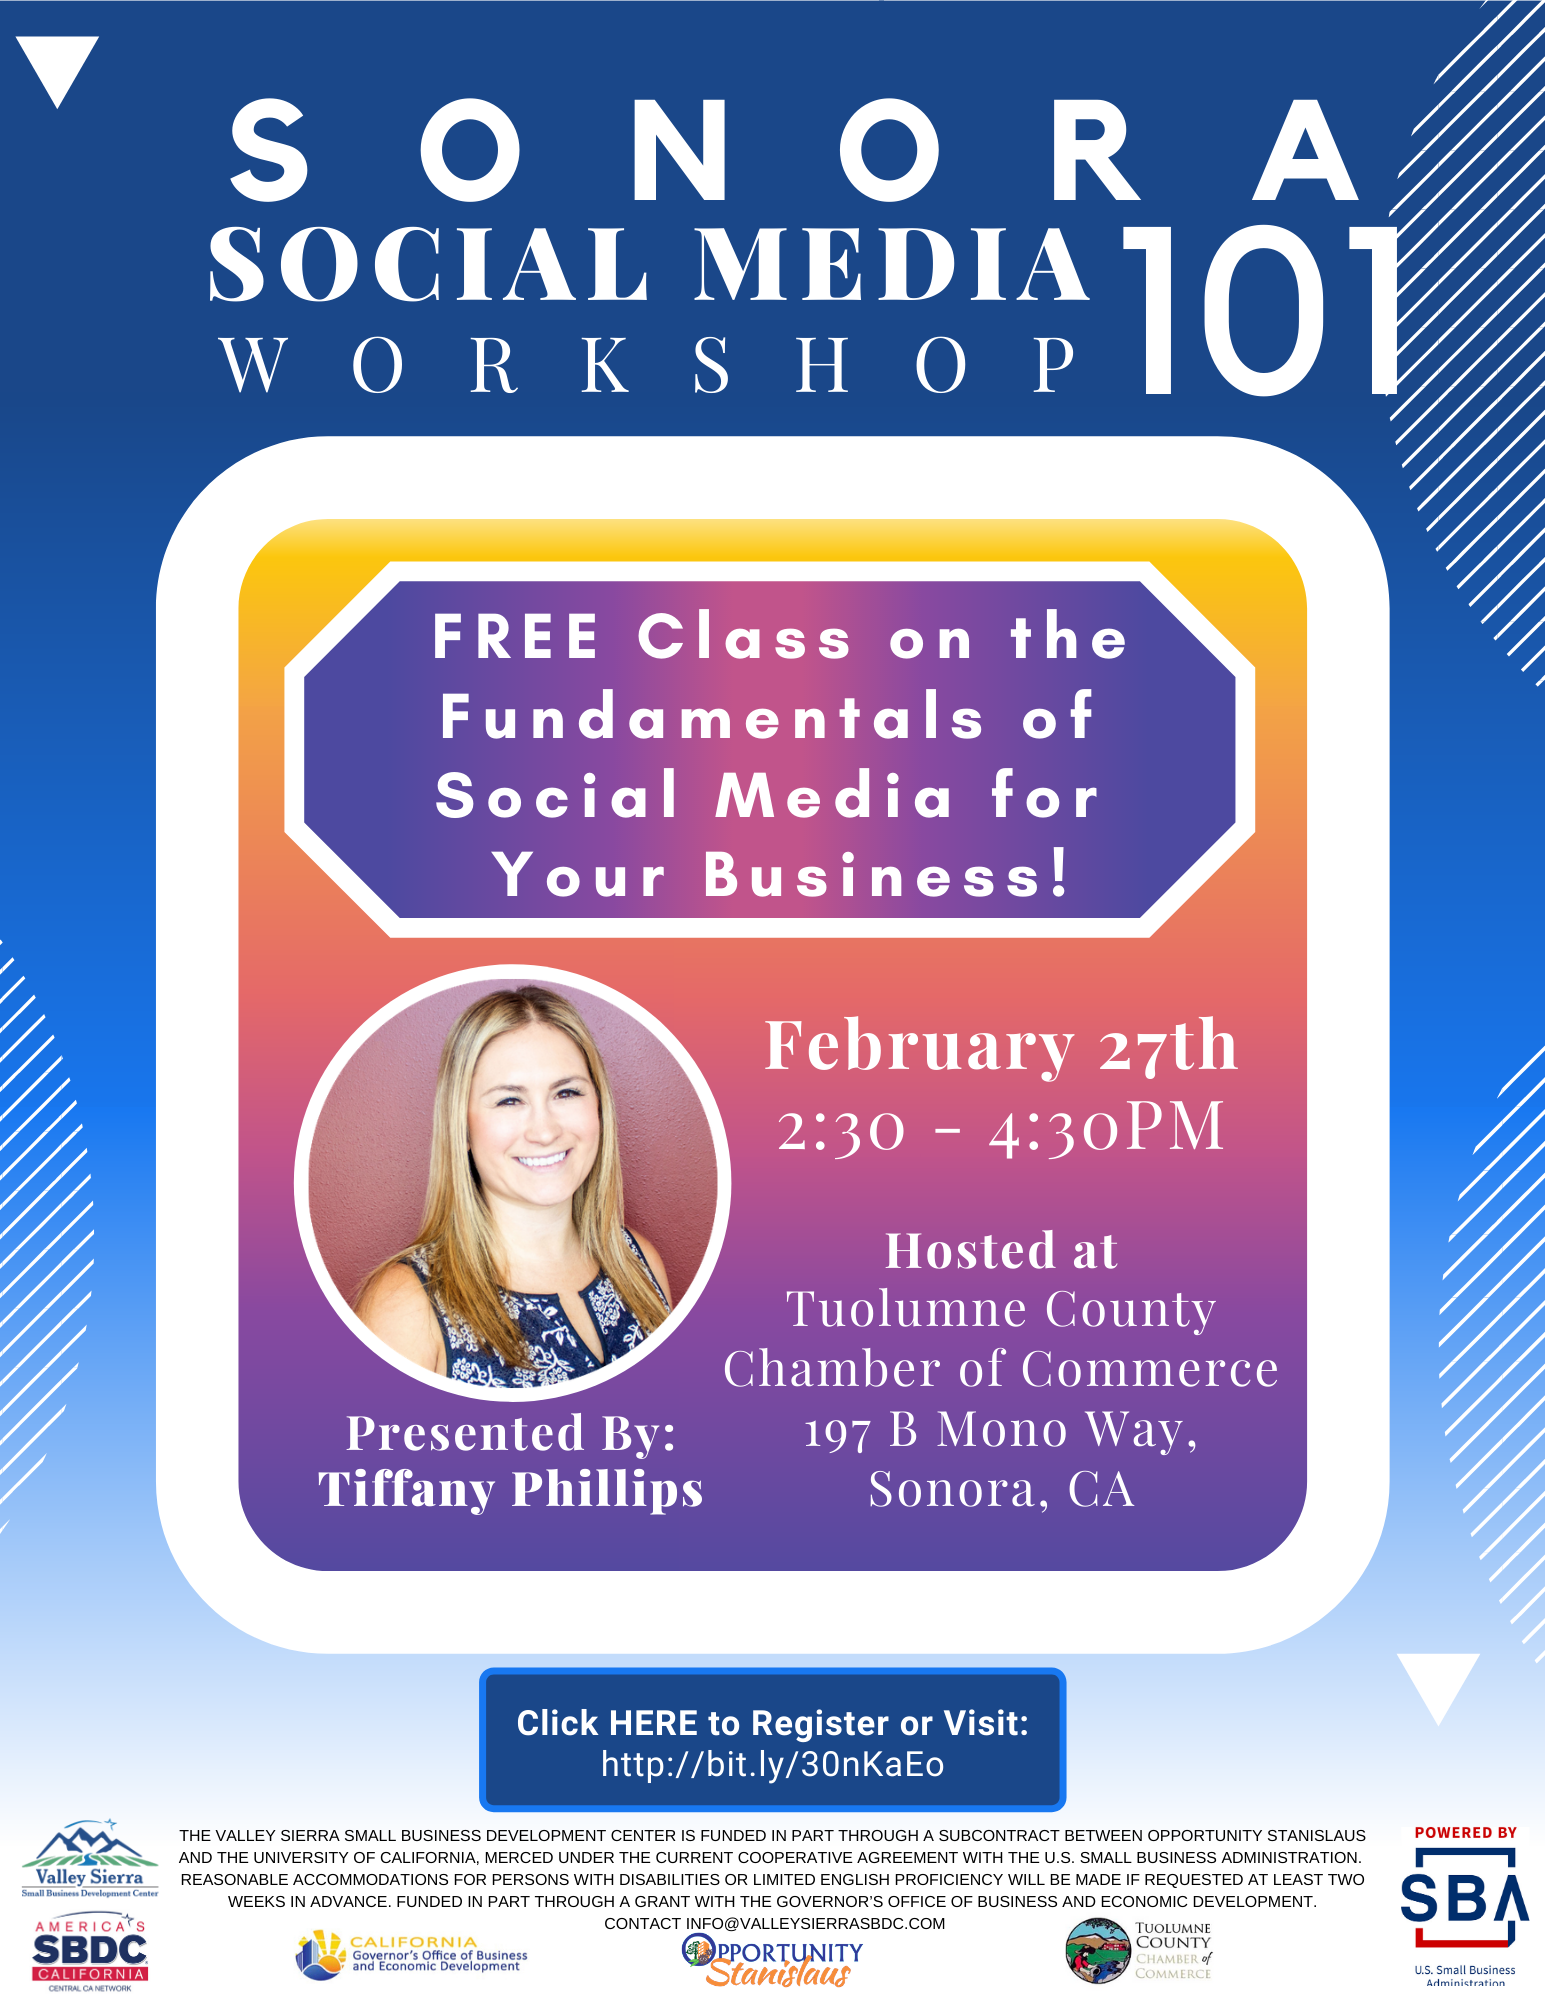 Event Flyer, Social Media 101, Join Tiffany Phillips as she guides you to understanding the fundamentals of social media marketing!  A MUST FOR ANY BUSINESS OWNER!